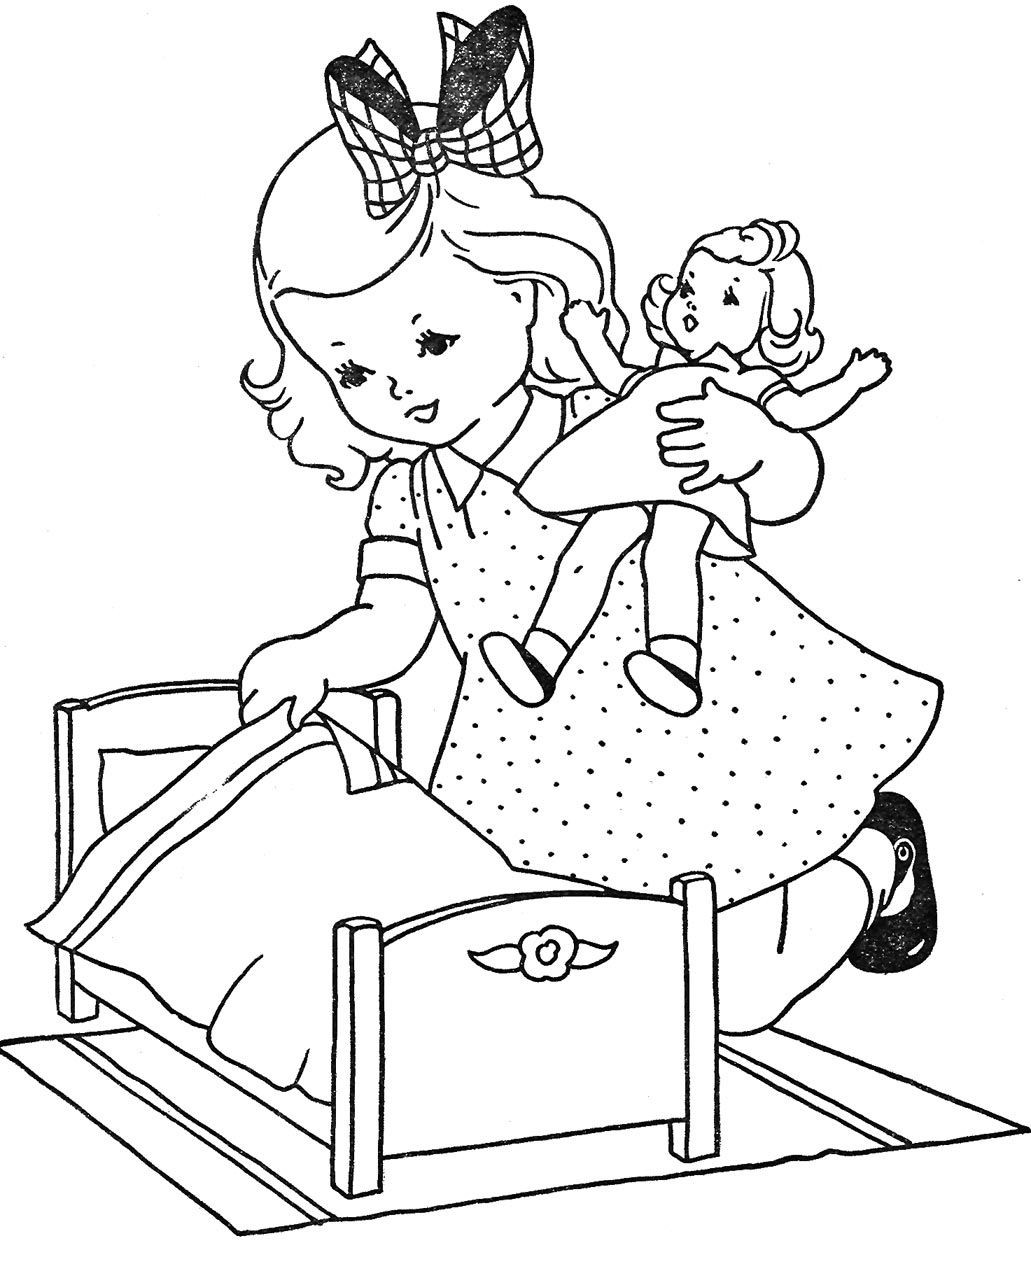 Baby Coloring Pages For Kids
 Doll Coloring Pages Best Coloring Pages For Kids